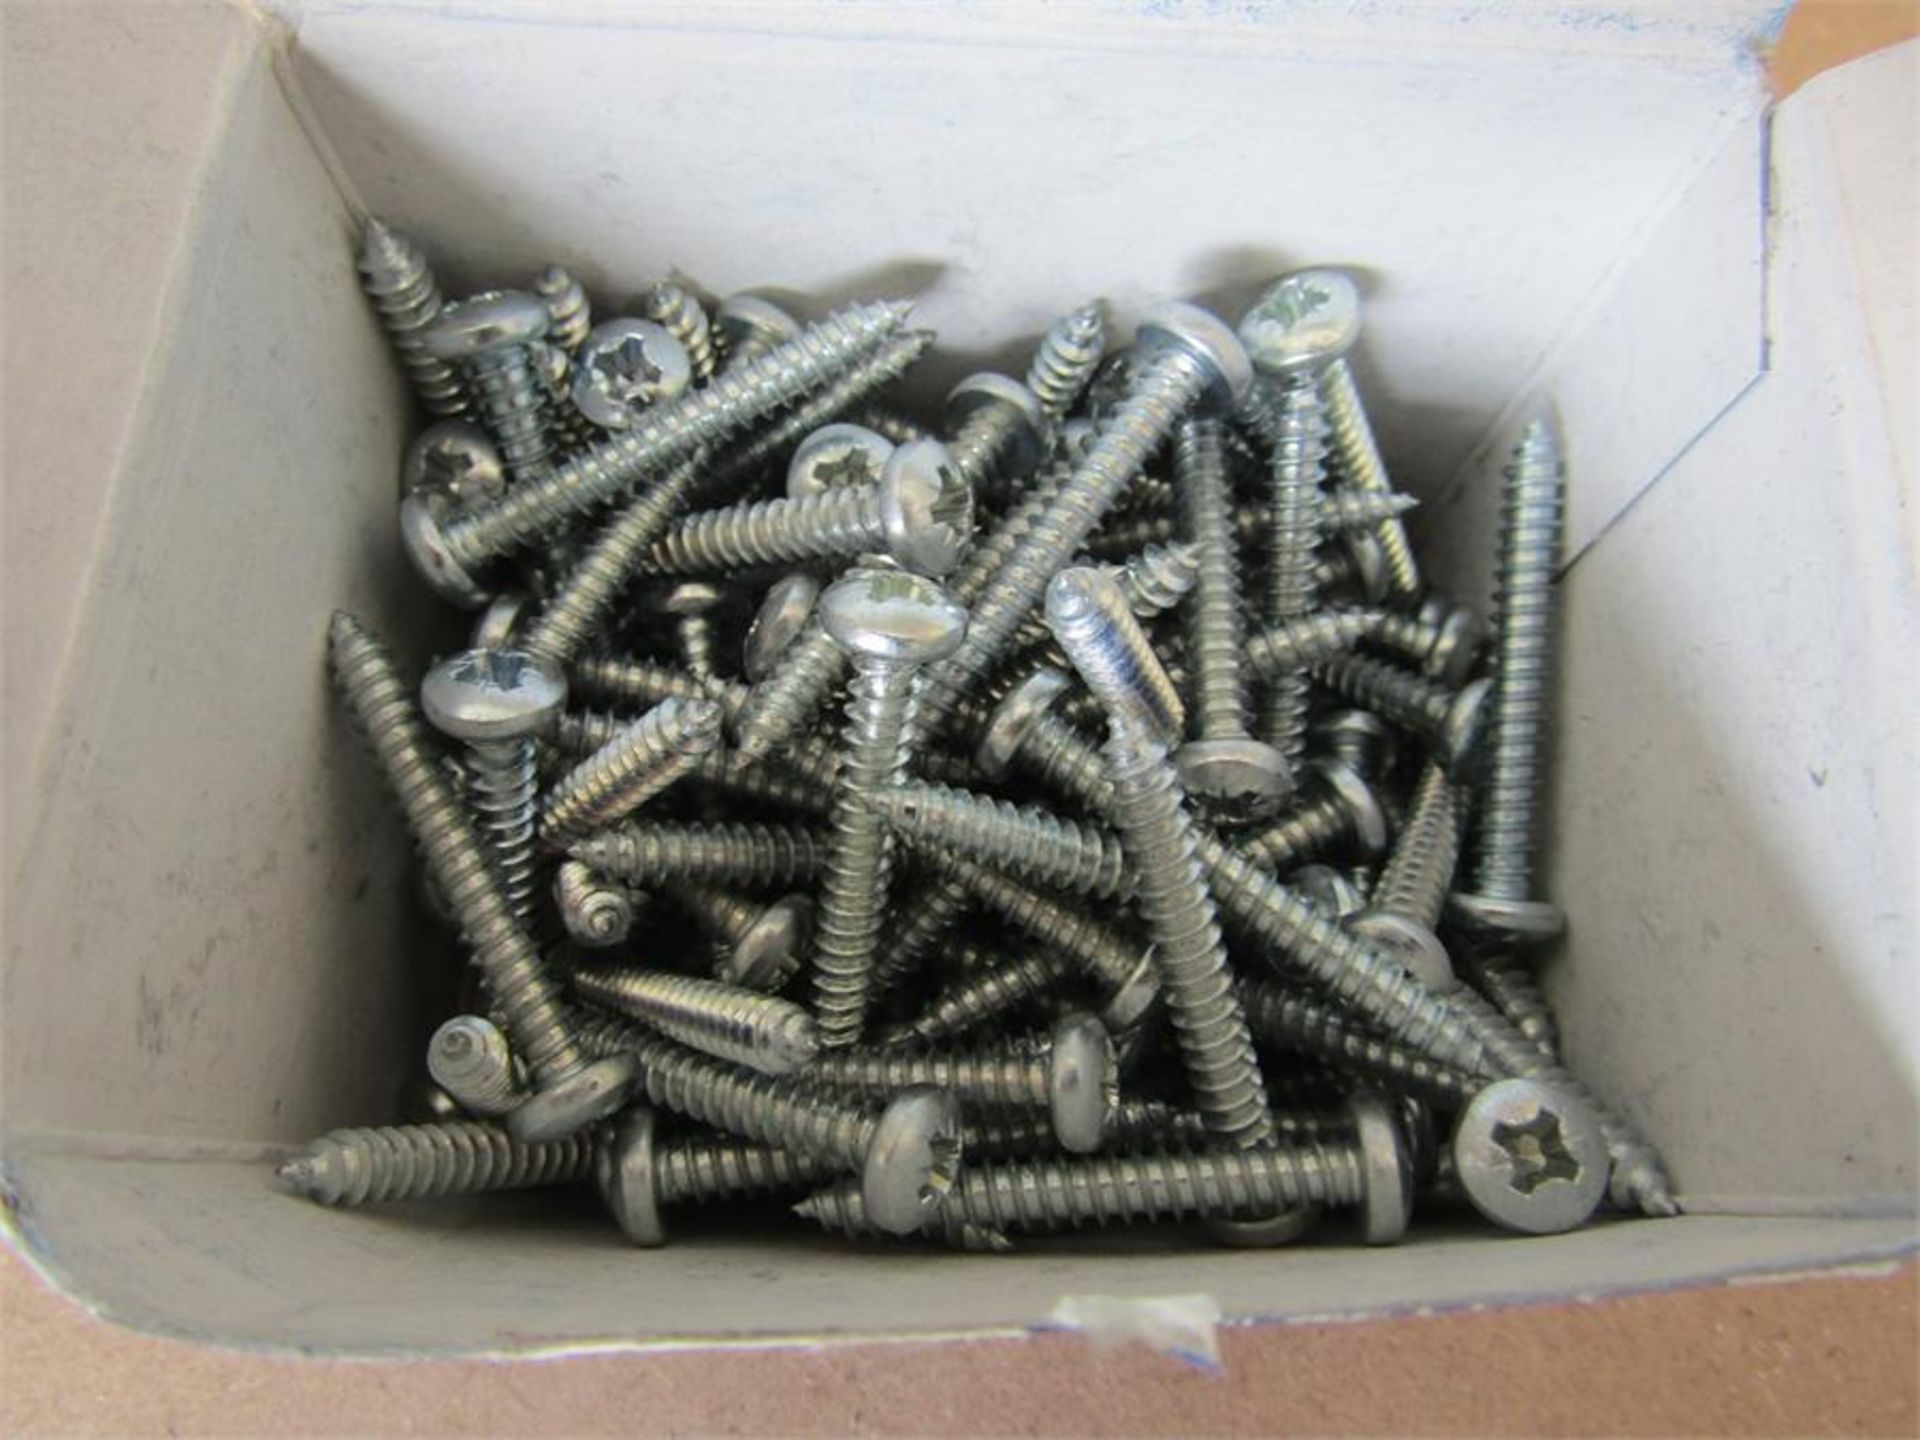 15 x Boxes of 100 Bright Zinc Plated Steel Screws